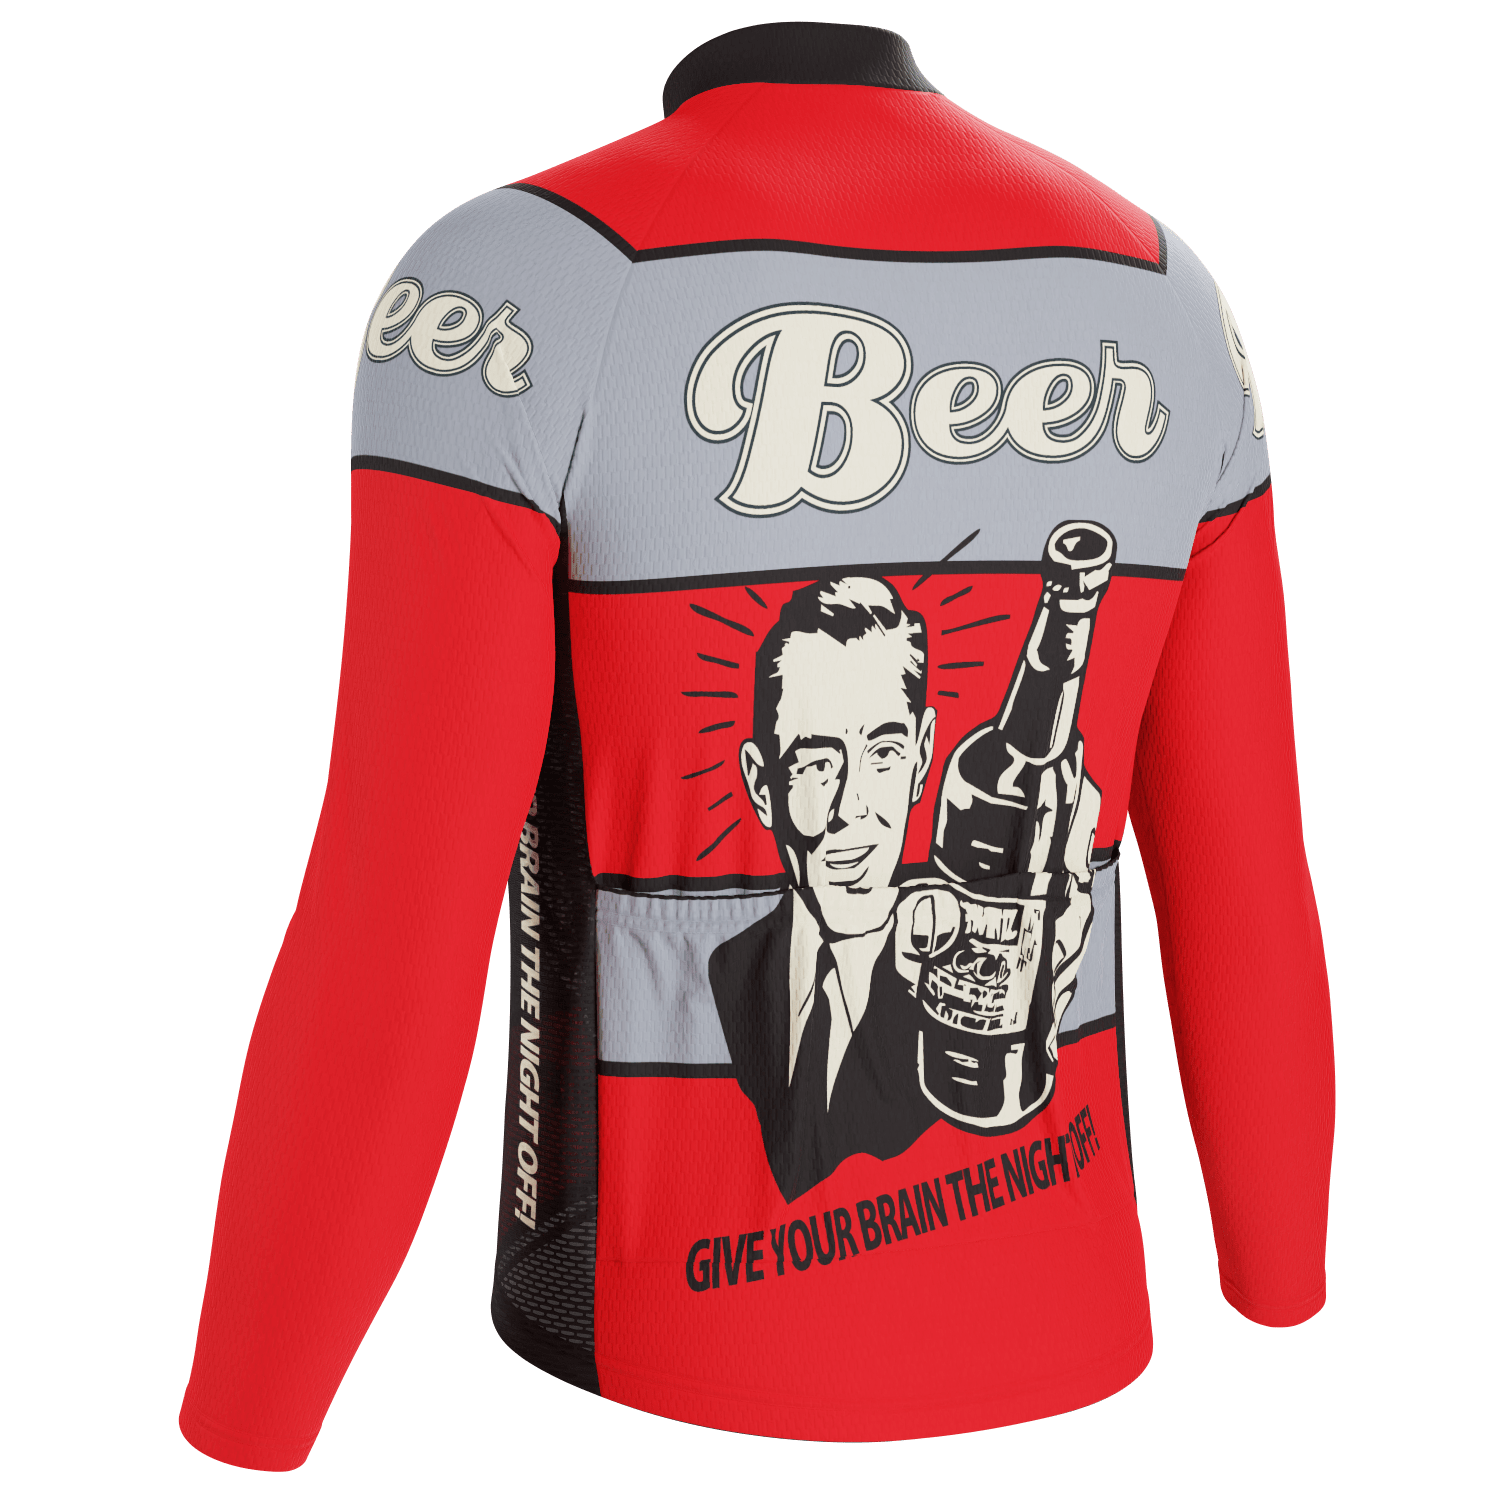 Men's Night Off Beer Long Sleeve Cycling Jersey